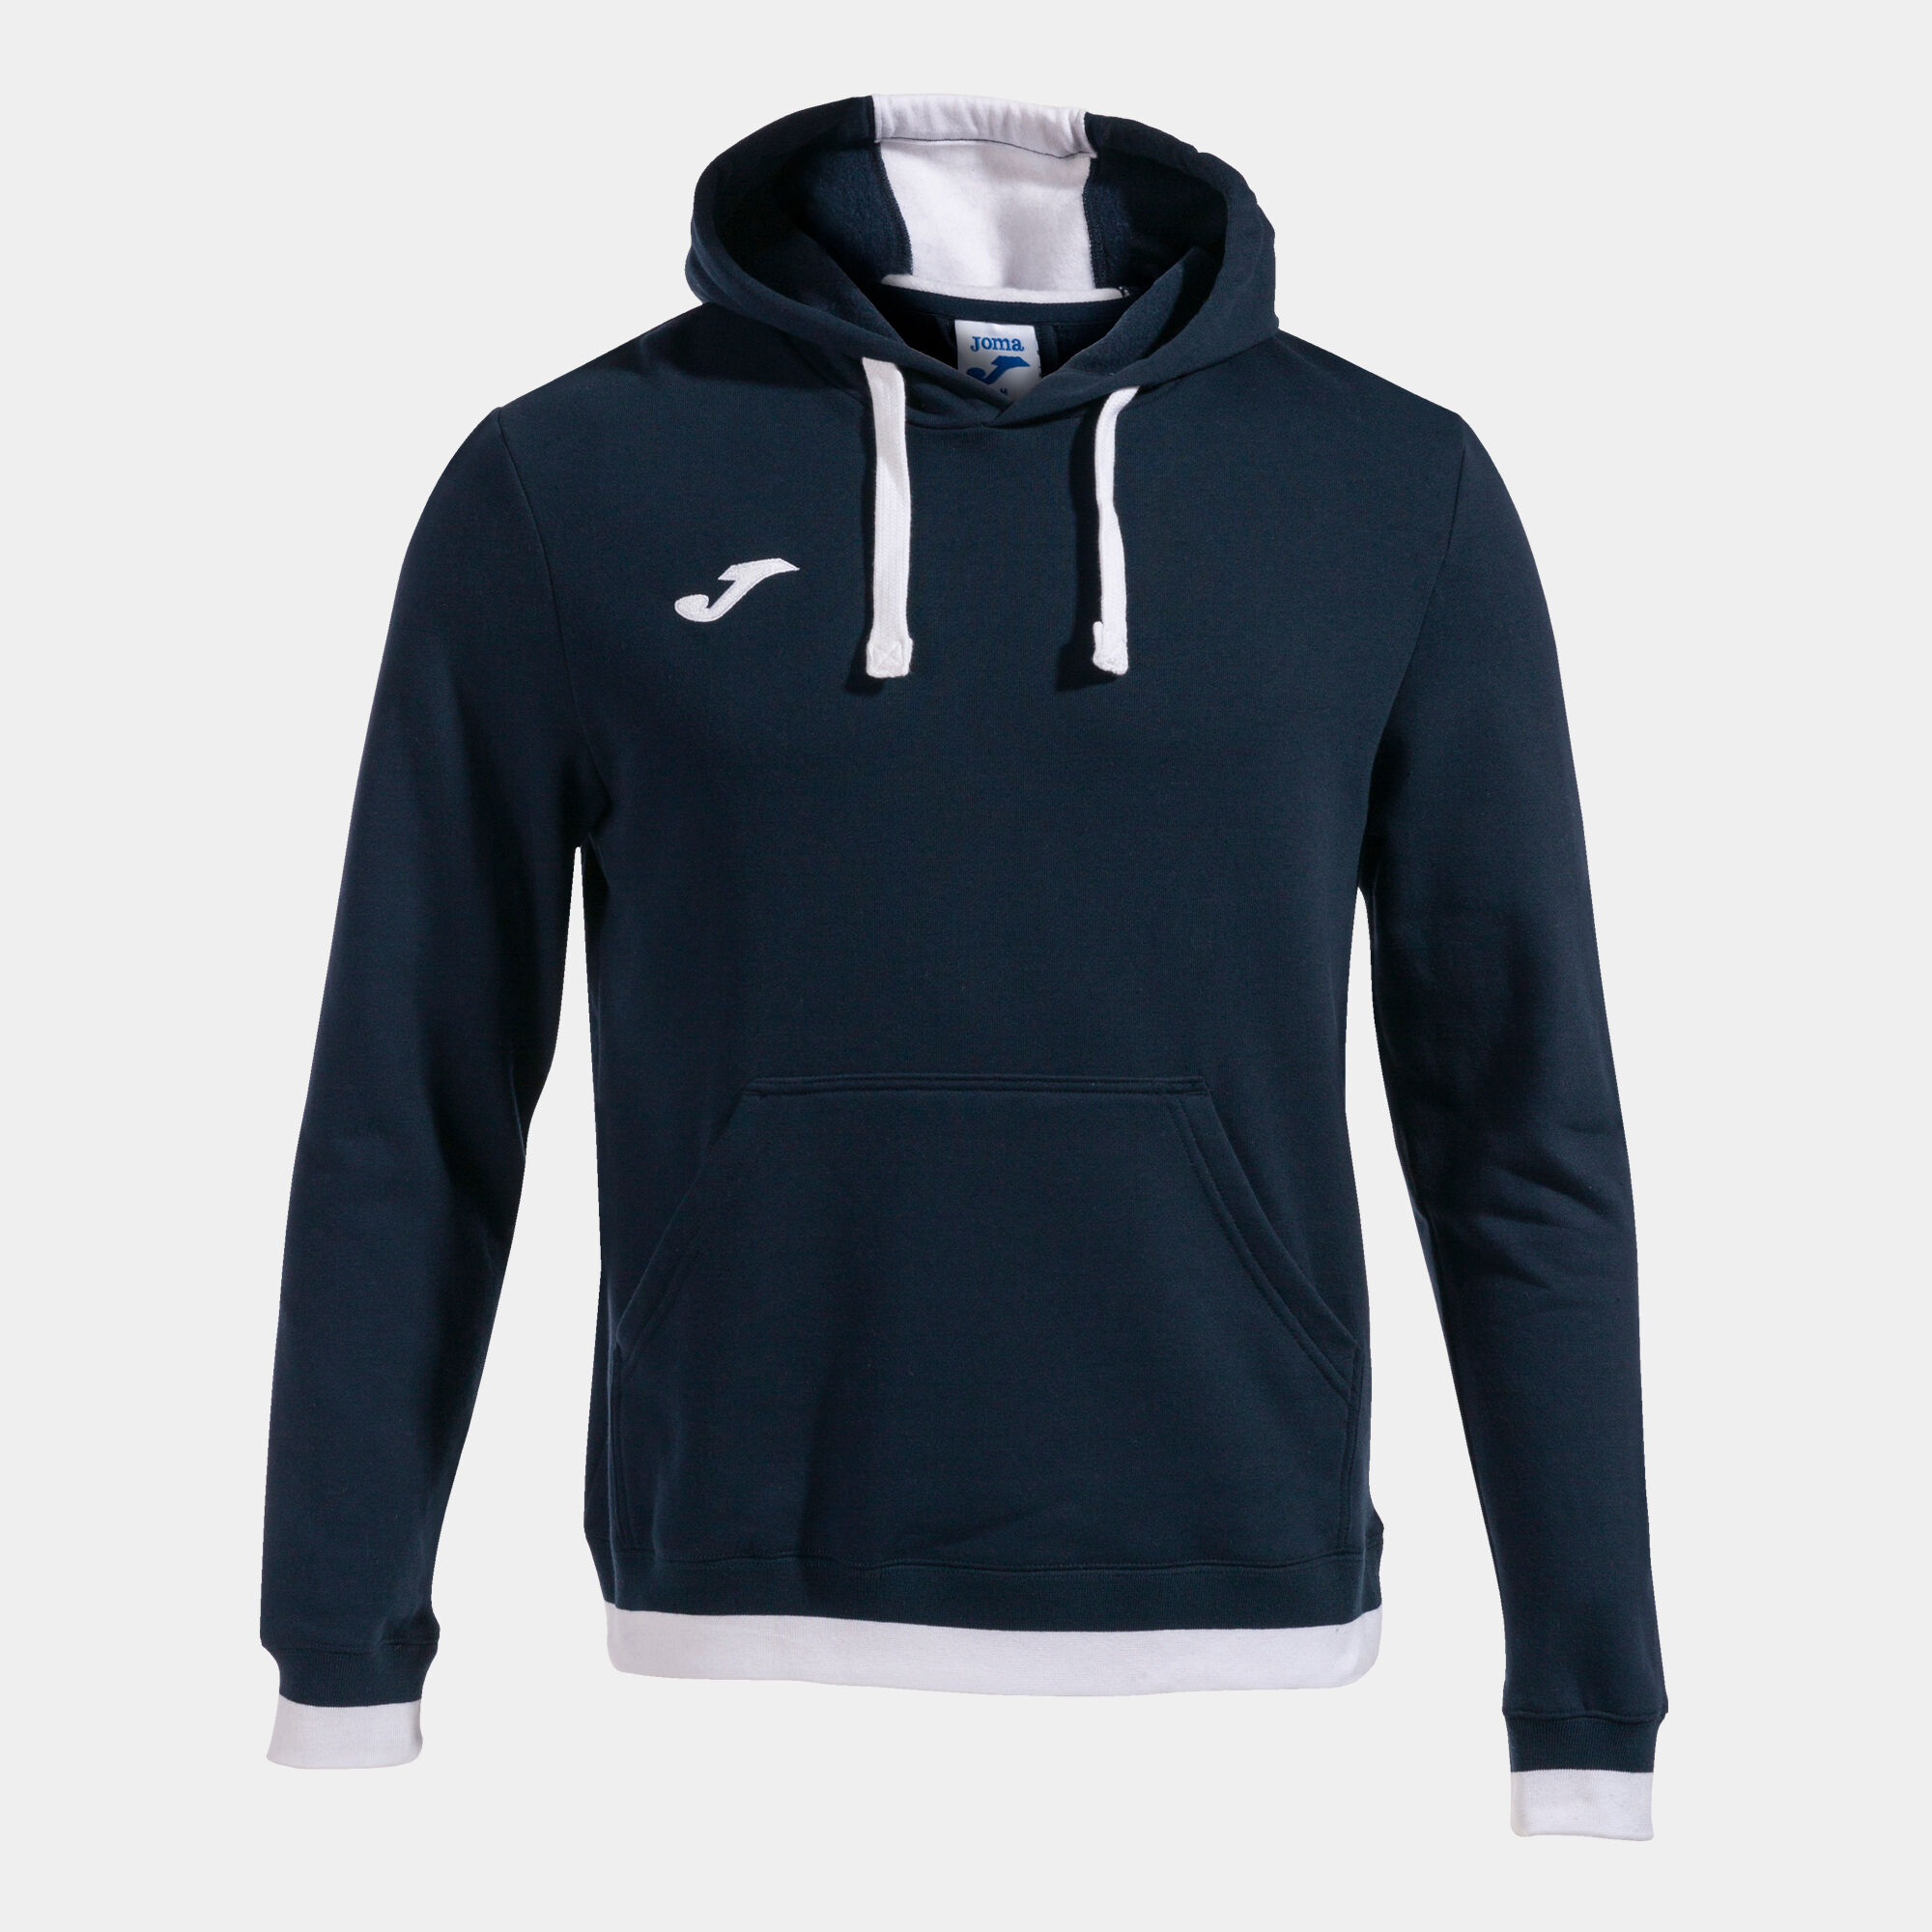 HOODED SWEATER MAN CONFORT II NAVY BLUE WHITE